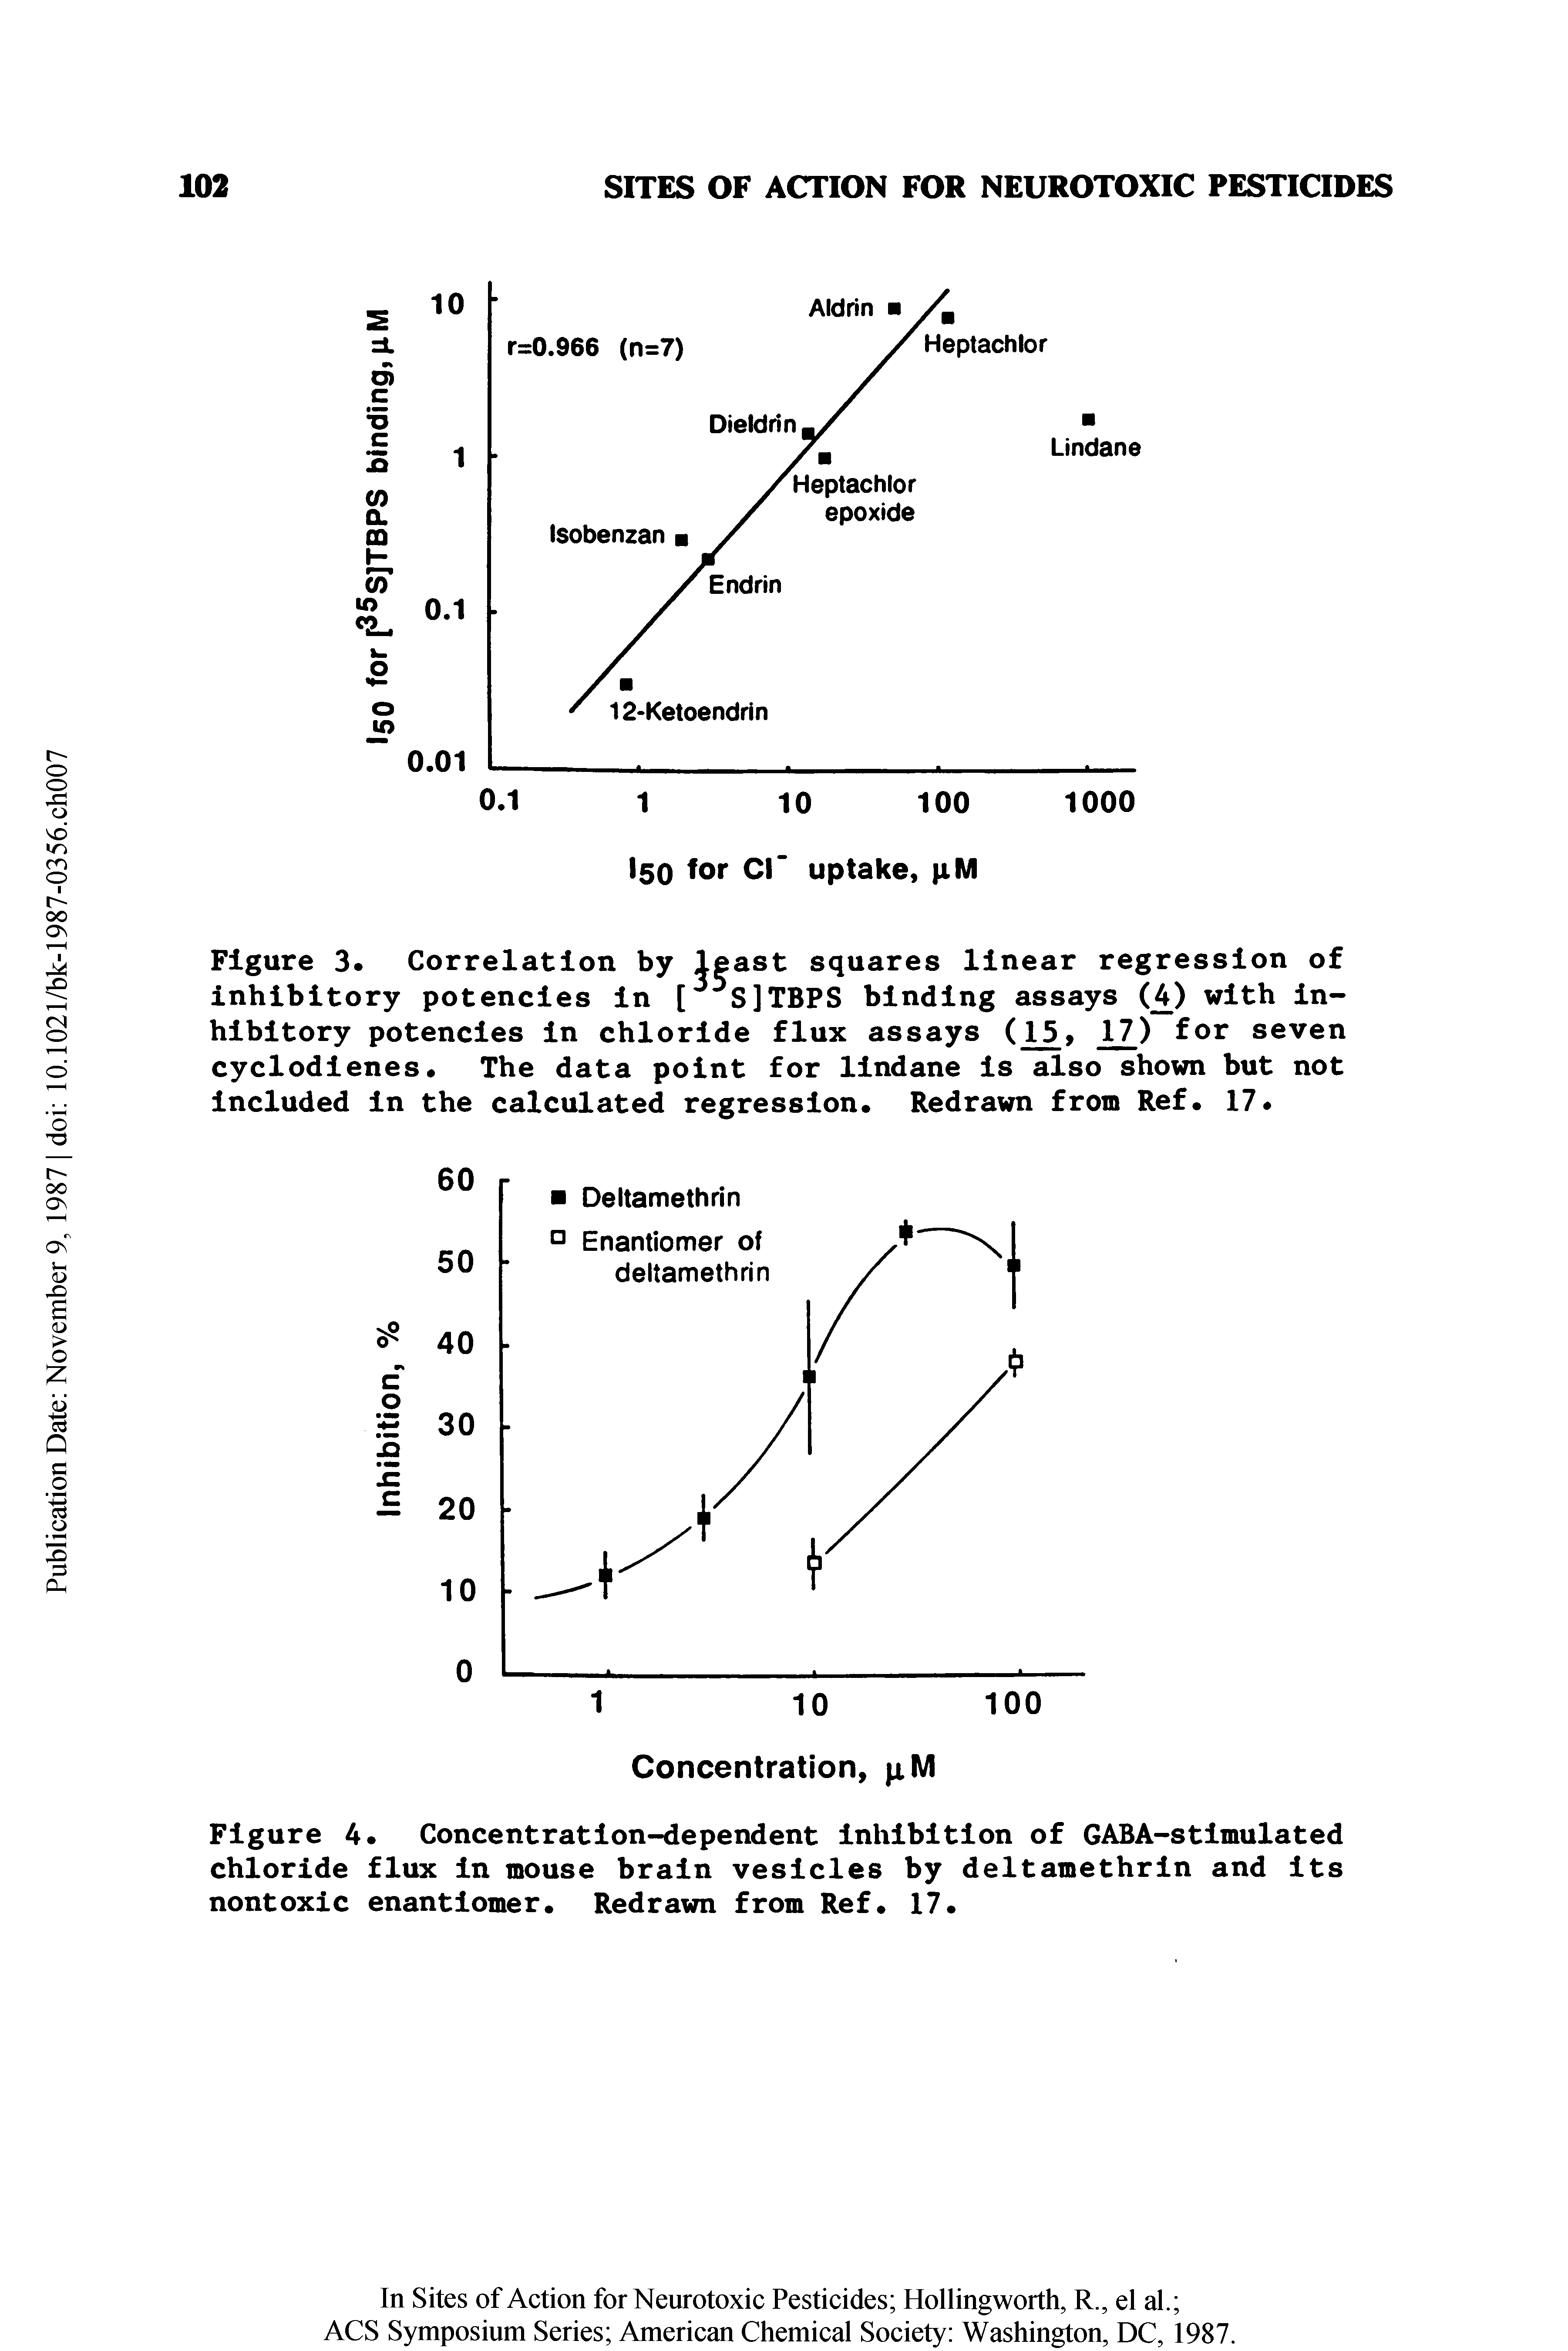 Figure 3. Correlation by least squares linear regression of inhibitory potencies in [ 5S]TBPS binding assays (4) with inhibitory potencies in chloride flux assays (1 5, 17) for seven cyclodienes. The data point for lindane is also shown but not included in the calculated regression. Redrawn from Ref. 17 ...